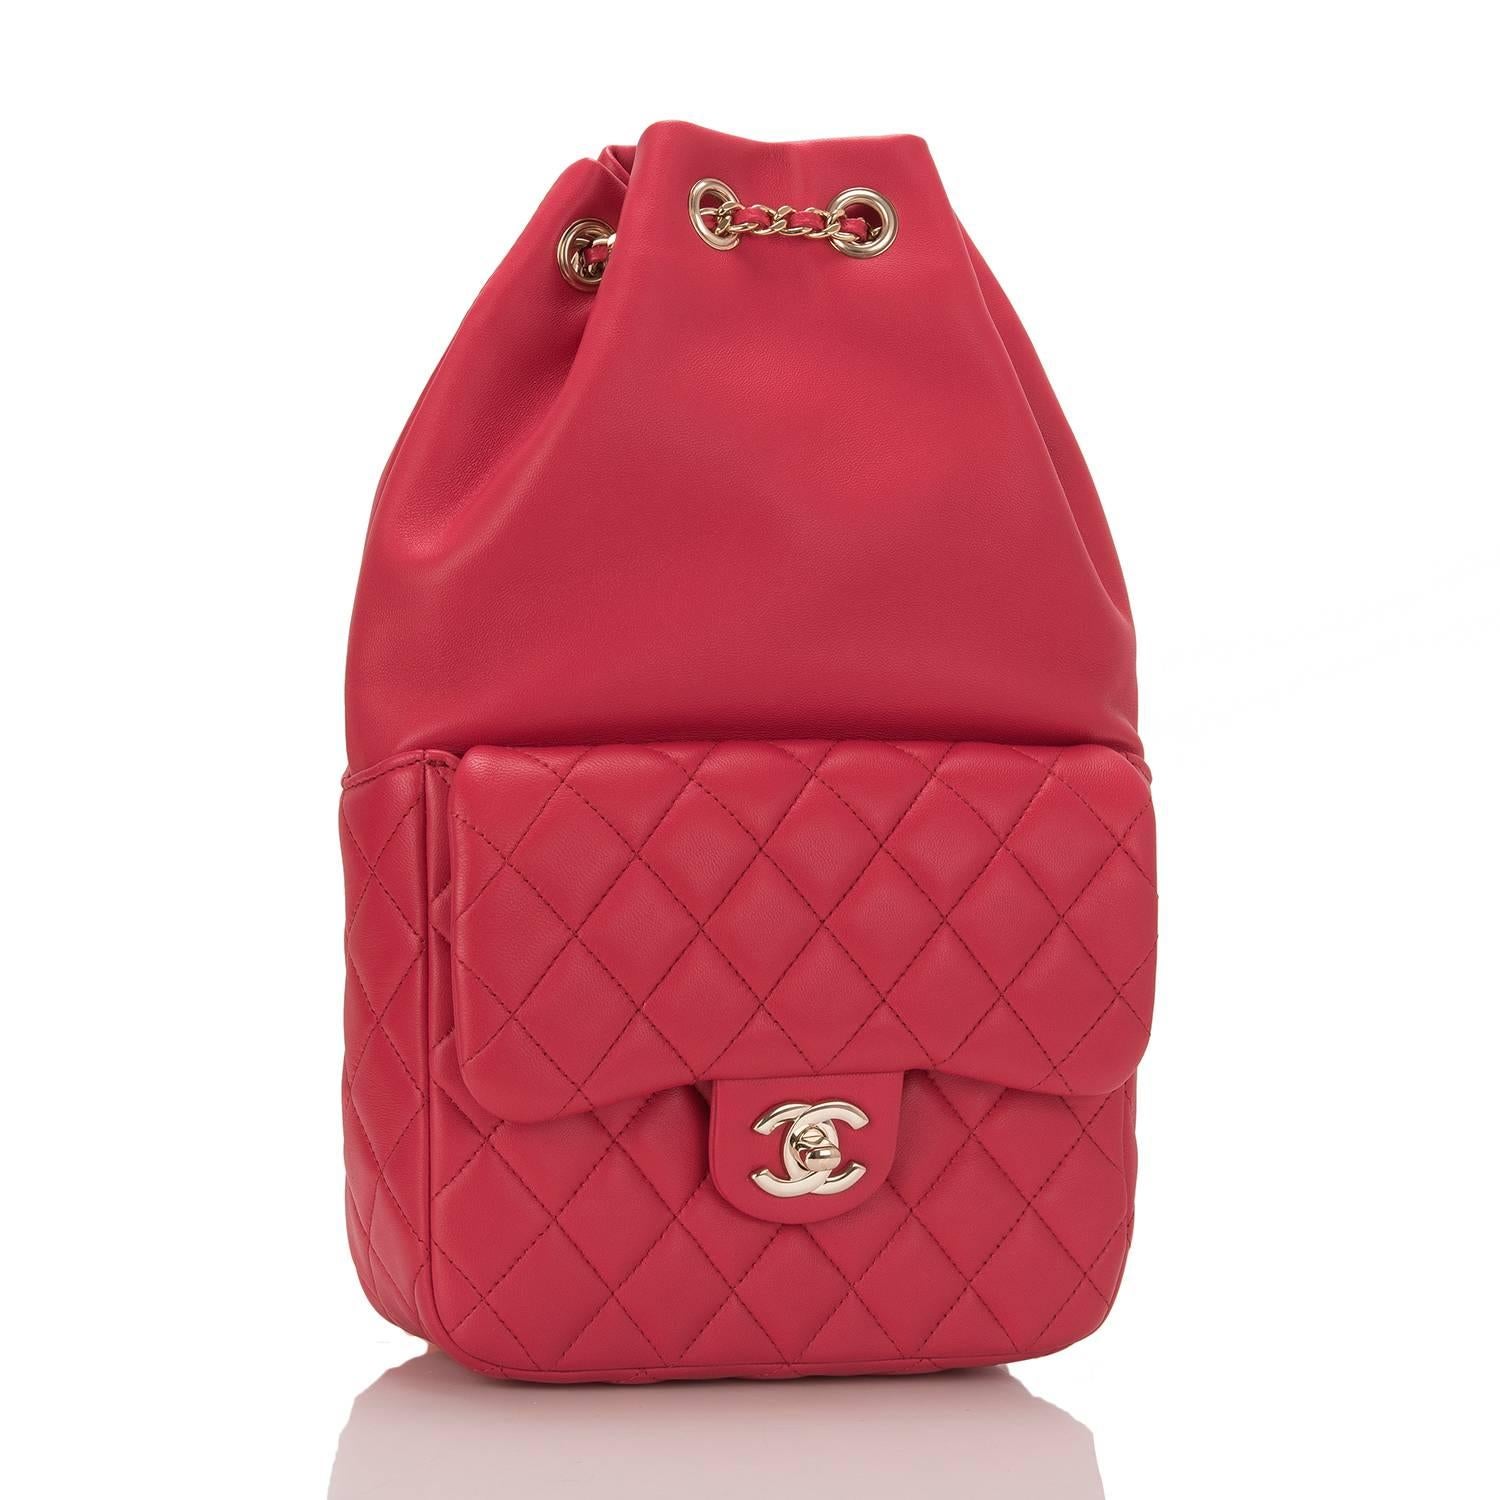 Chanel red flap backpack made of lambskin leather and accented with light gold tone hardware;

This bag features a front quilted leather flap pocket with signature CC turnlock closure, a top cinch closure and interwoven light gold tone chain link